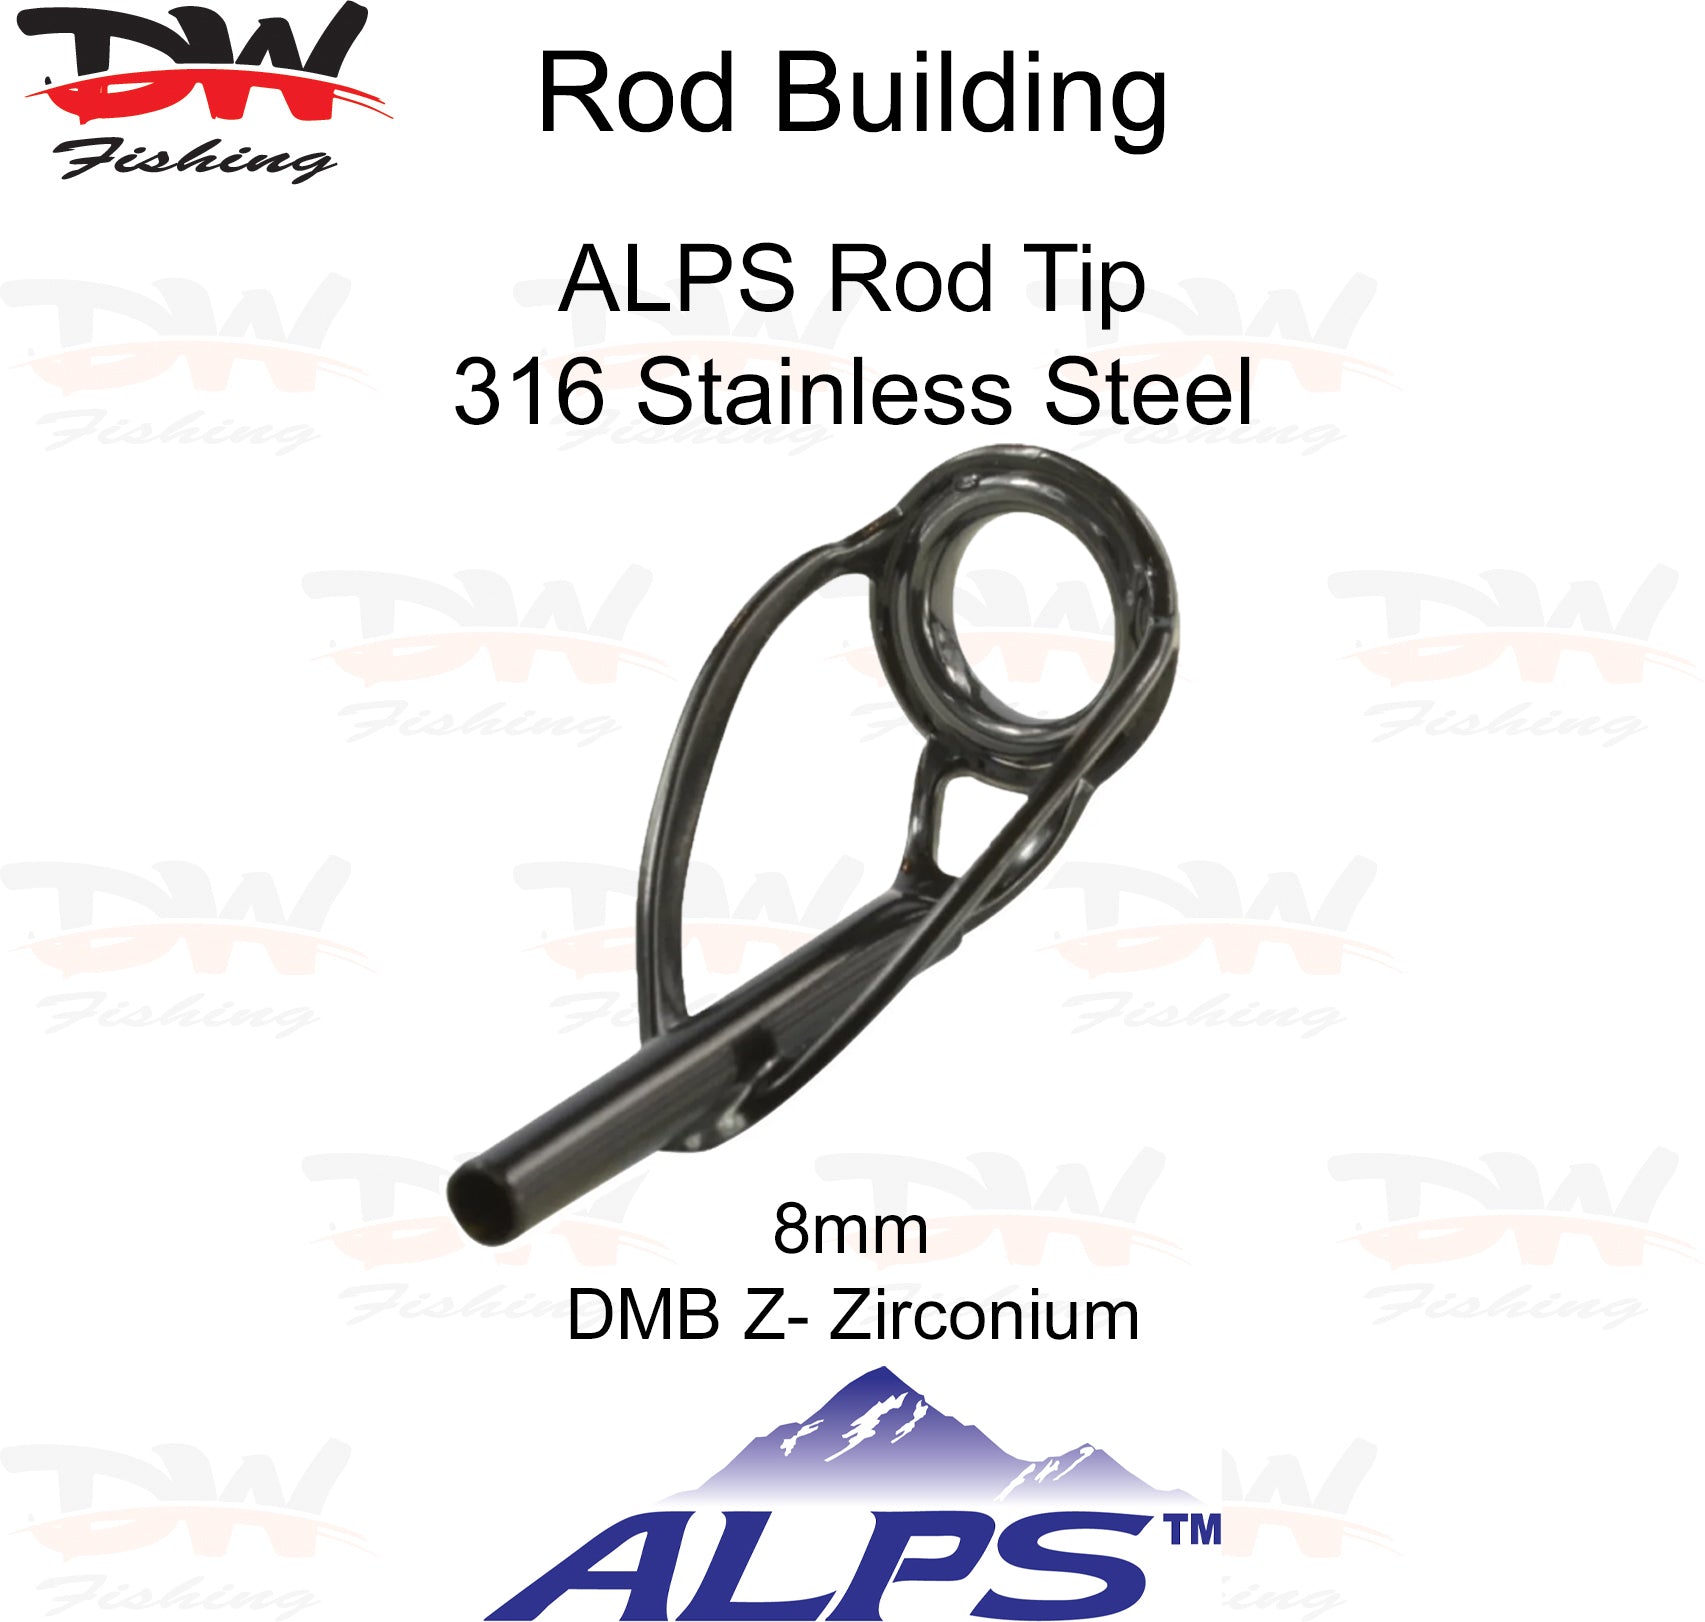 ALPS rod tip DMB-Z Black 316 stainless steel anti tangle frame with black zirconium insert ring, single rod tip picture with 8mm rod tip and logo below